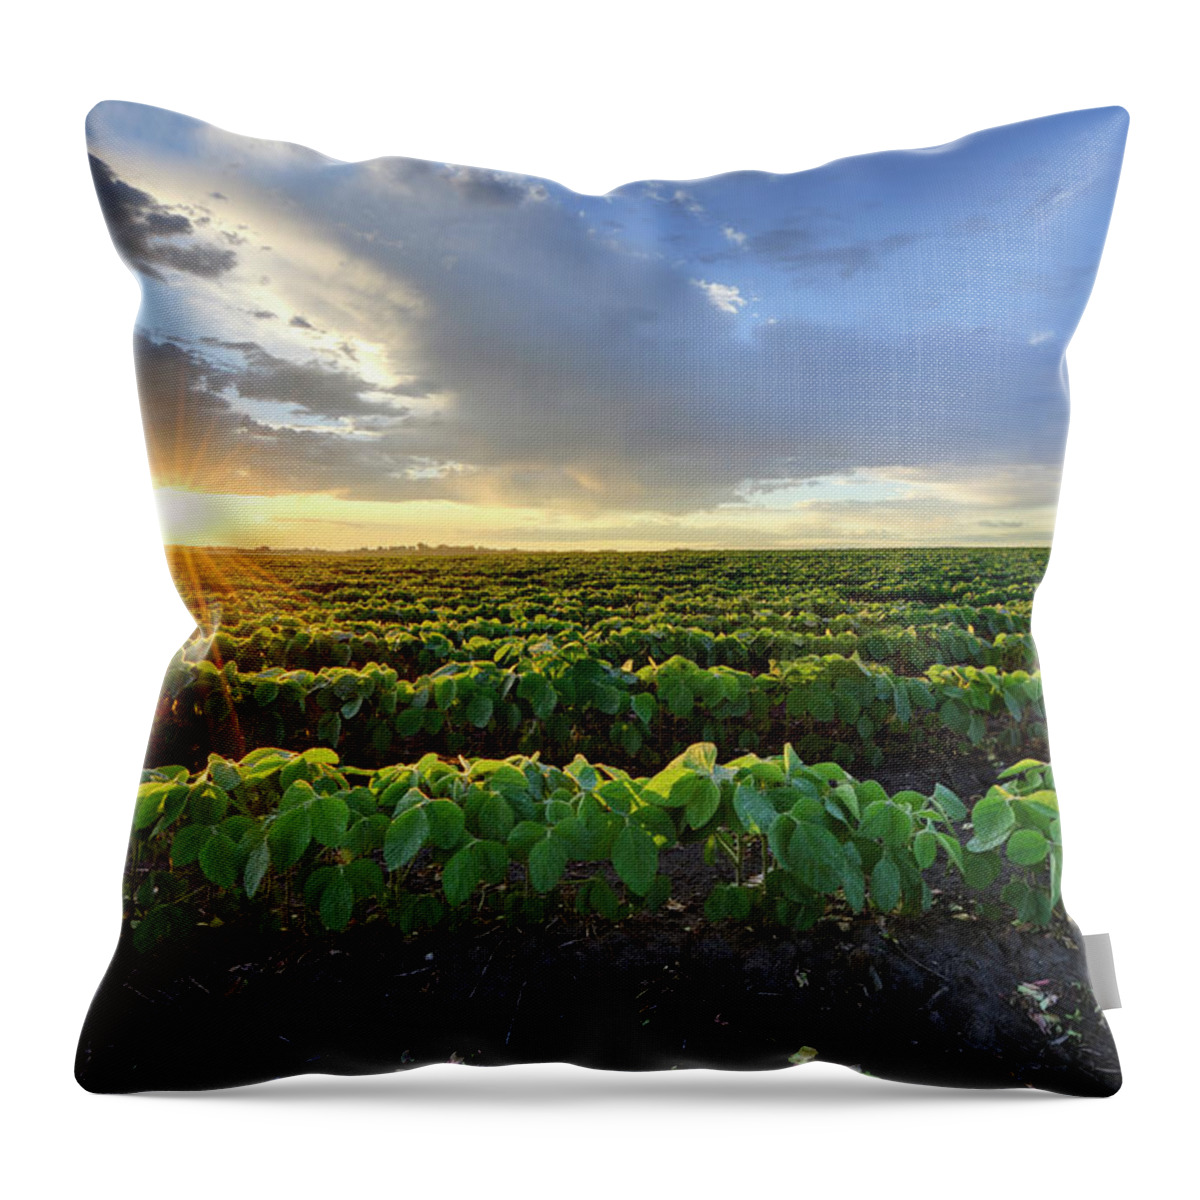 Season Throw Pillow featuring the photograph Soybean Field At Sunrise by Hauged